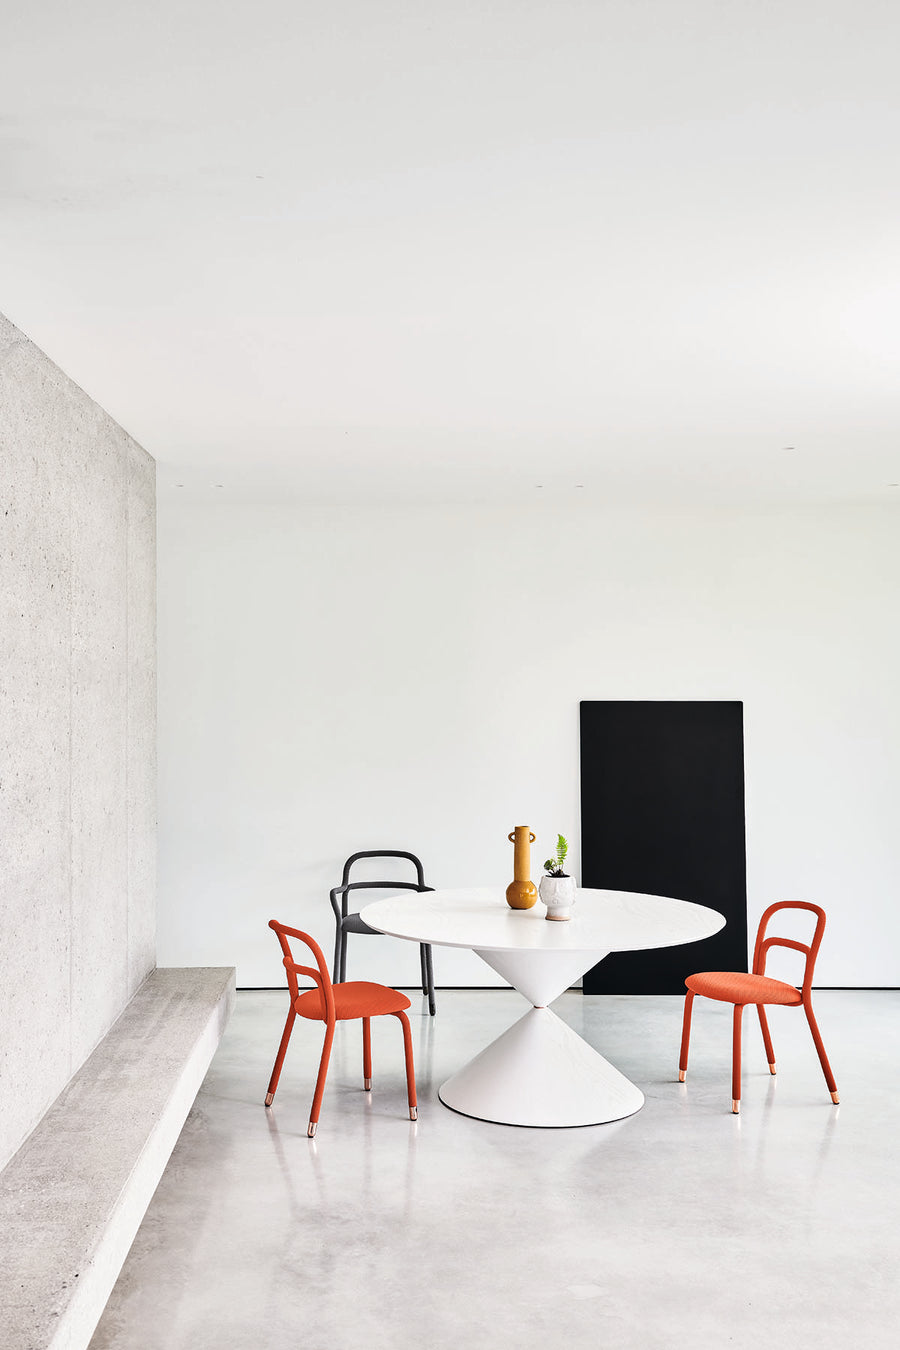 Fixed round Clessidra Dining Table with white base and white top. Placed in a white room with two orange chairs and one black chair.